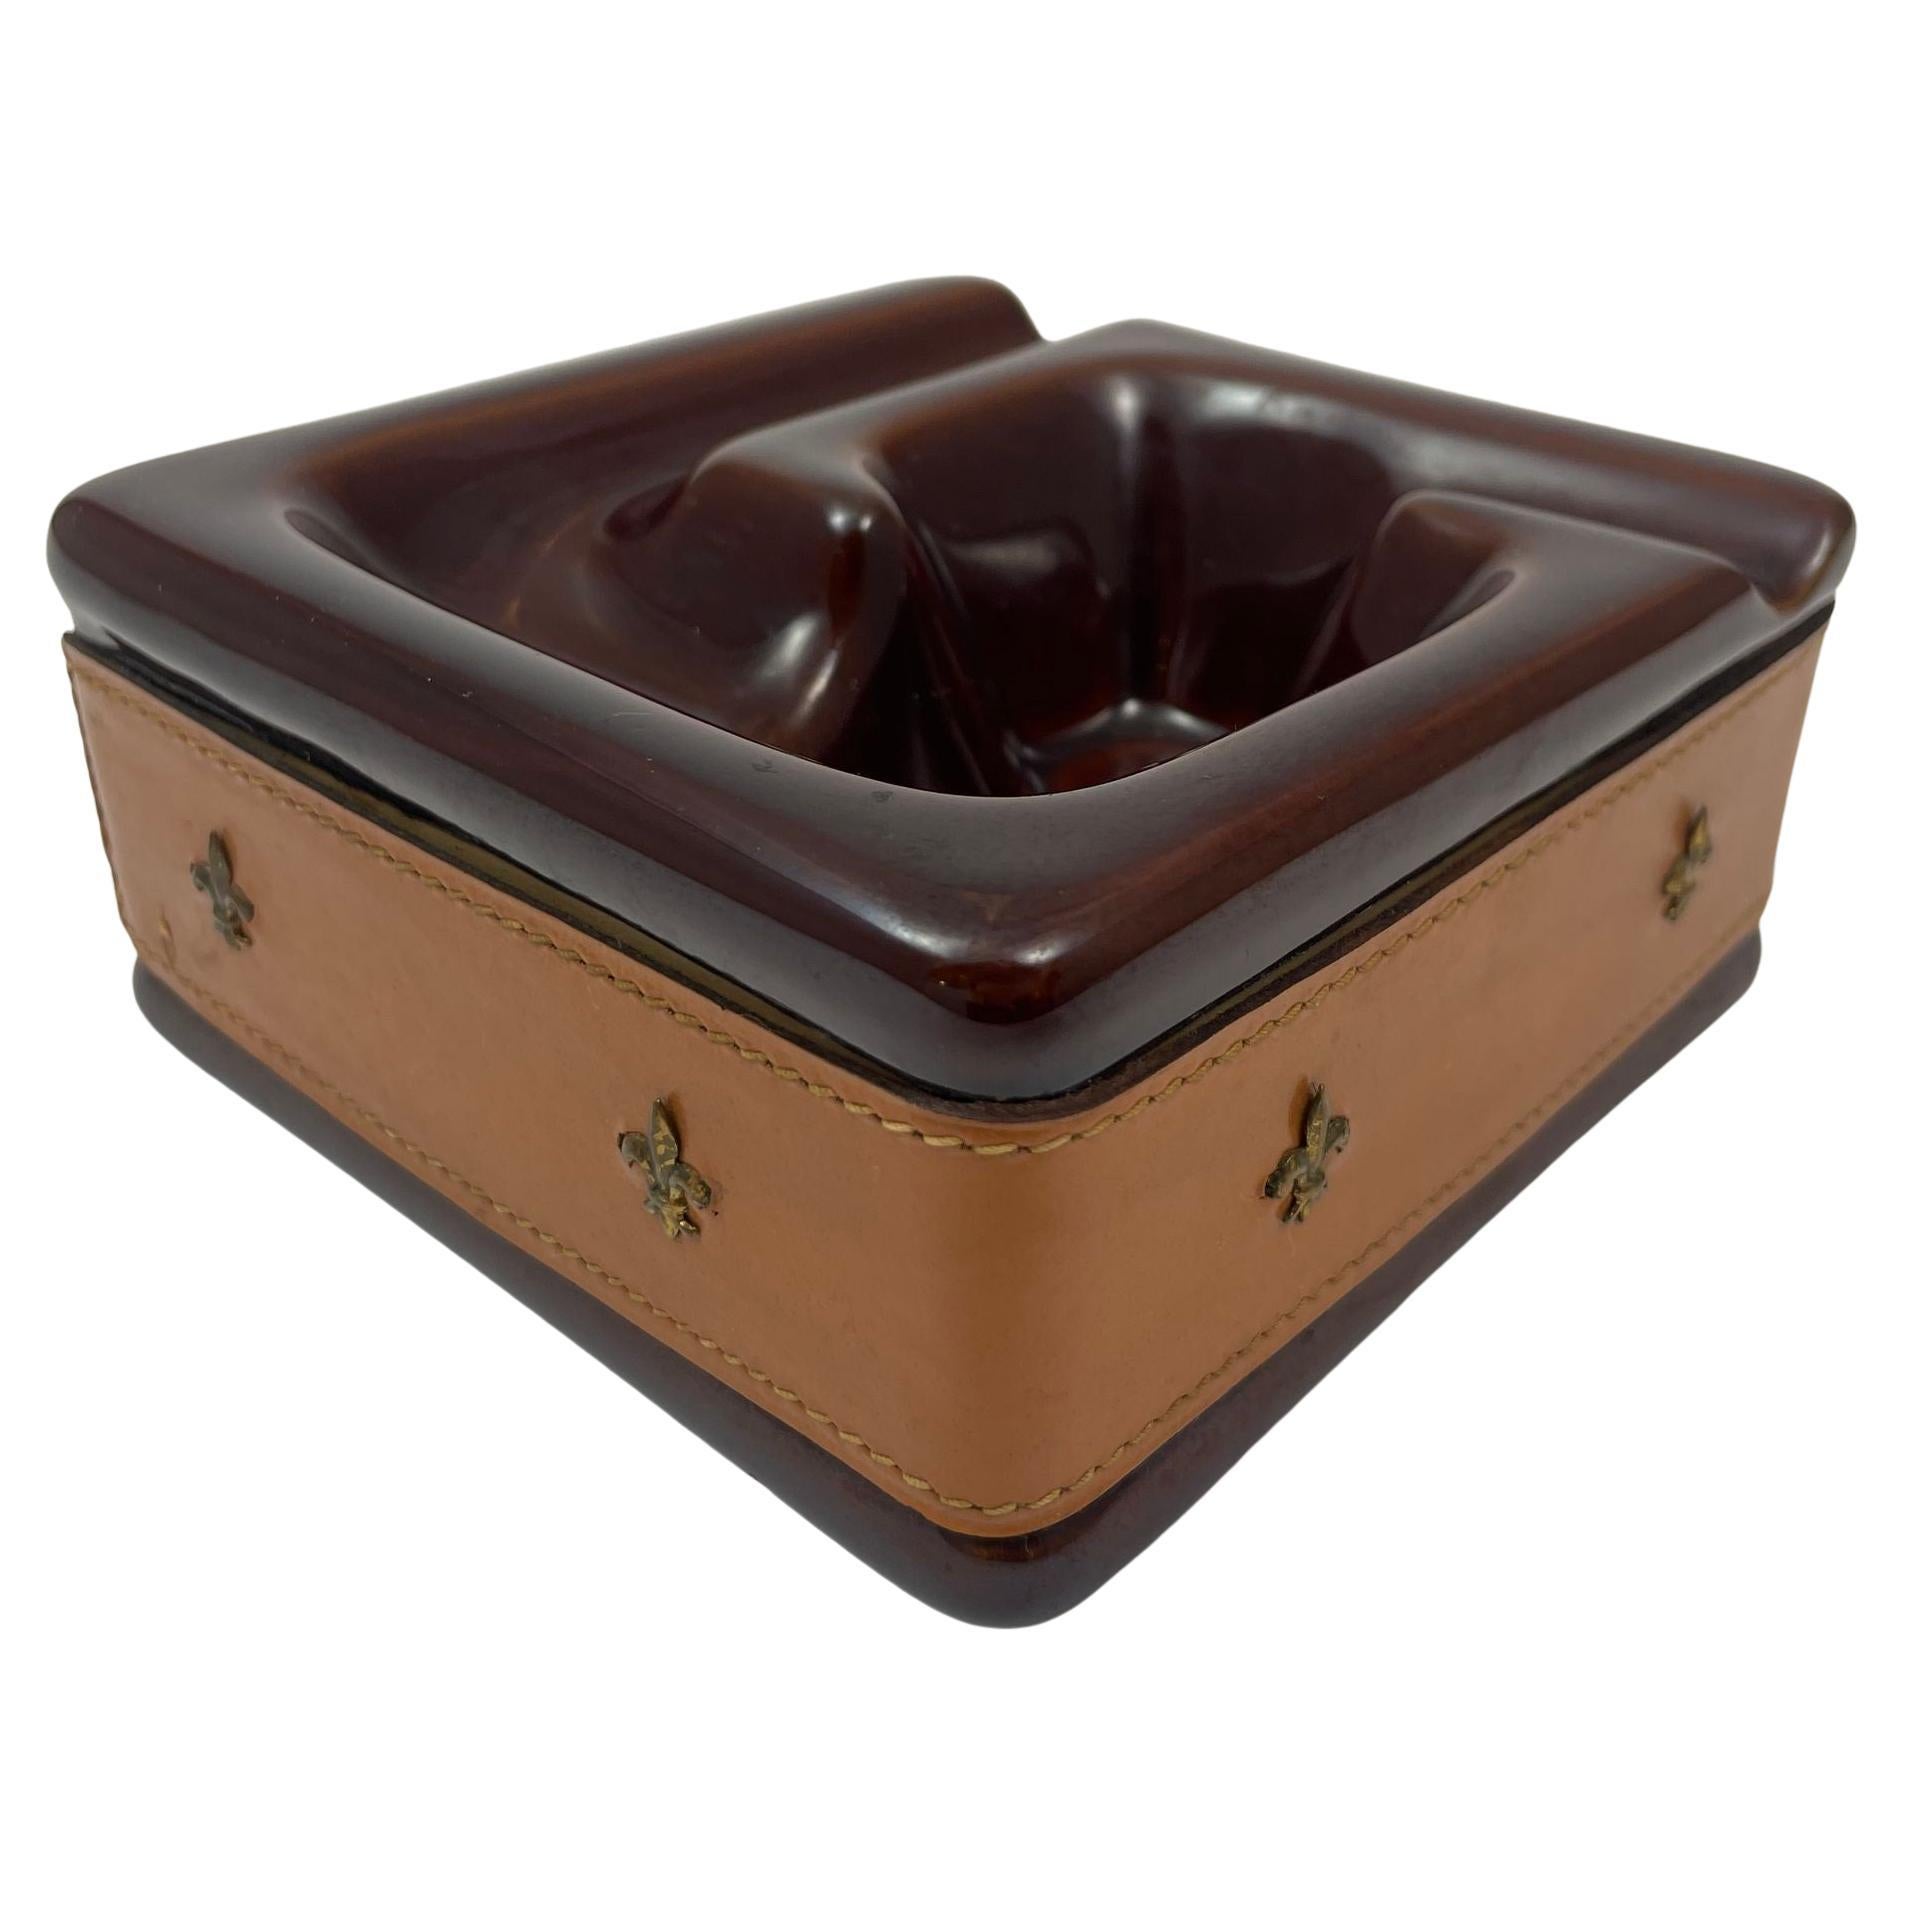 Vintage Brown Ceramic Ashtray Wrapped in Saddle Leather For Sale